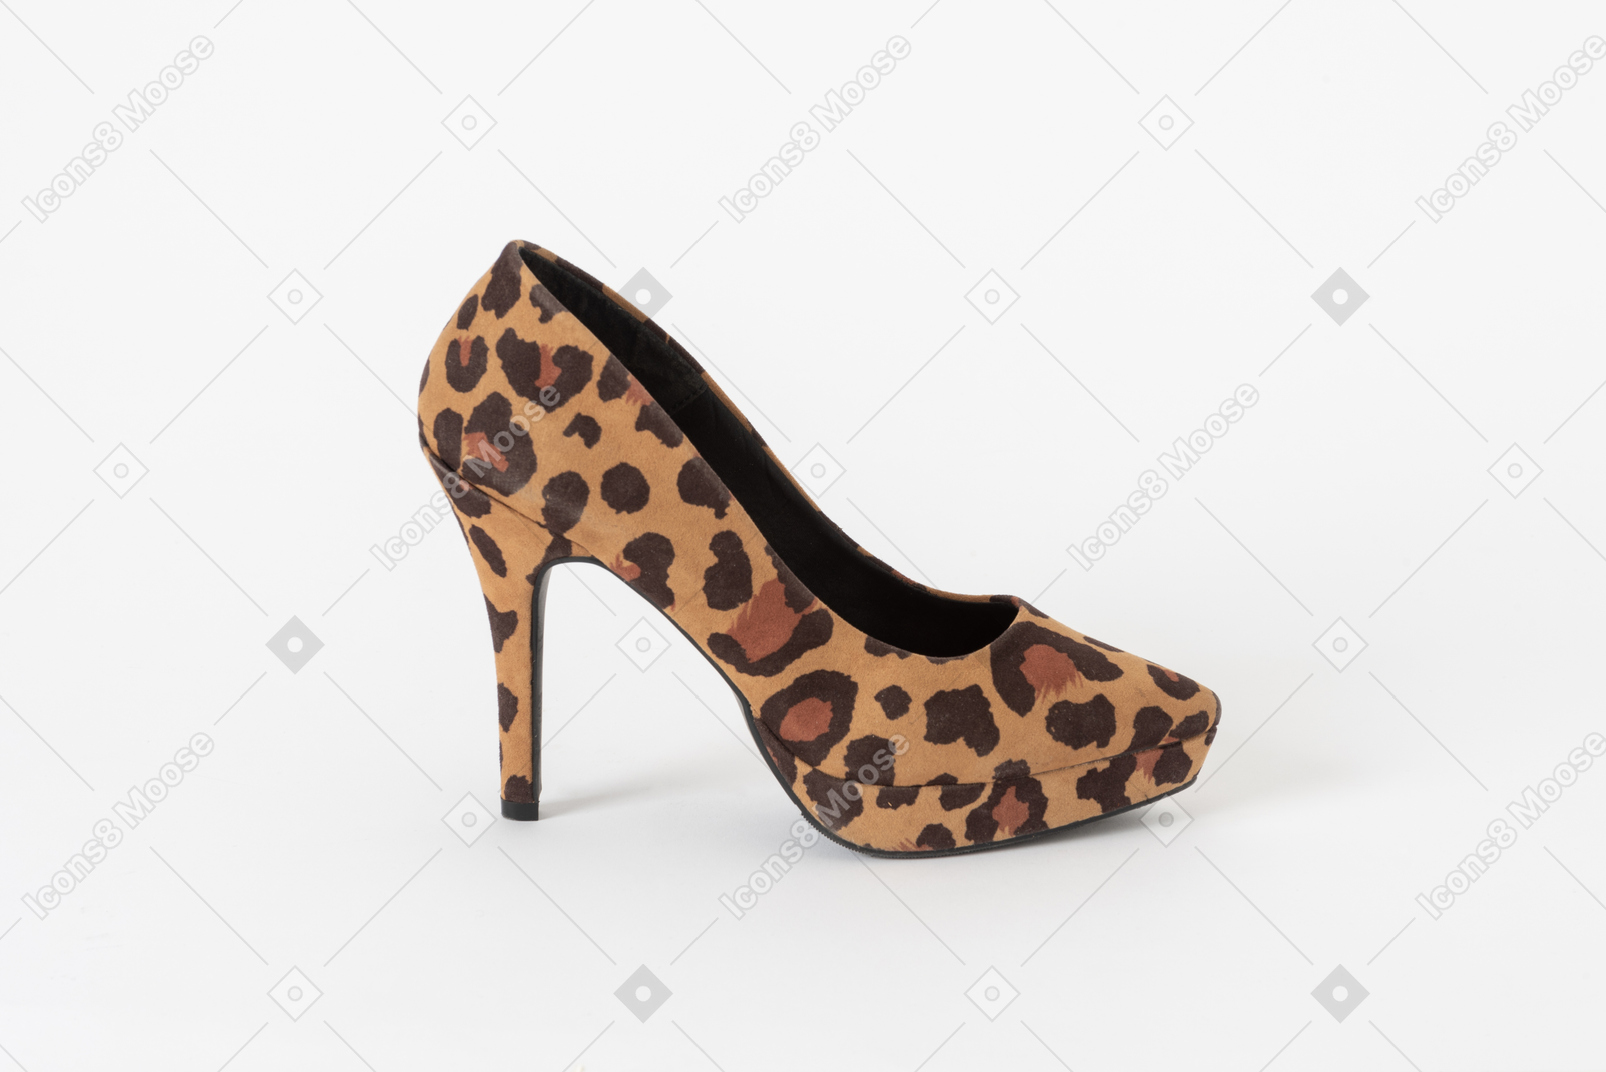 A side shot of a stiletto shoe with a leopard print on